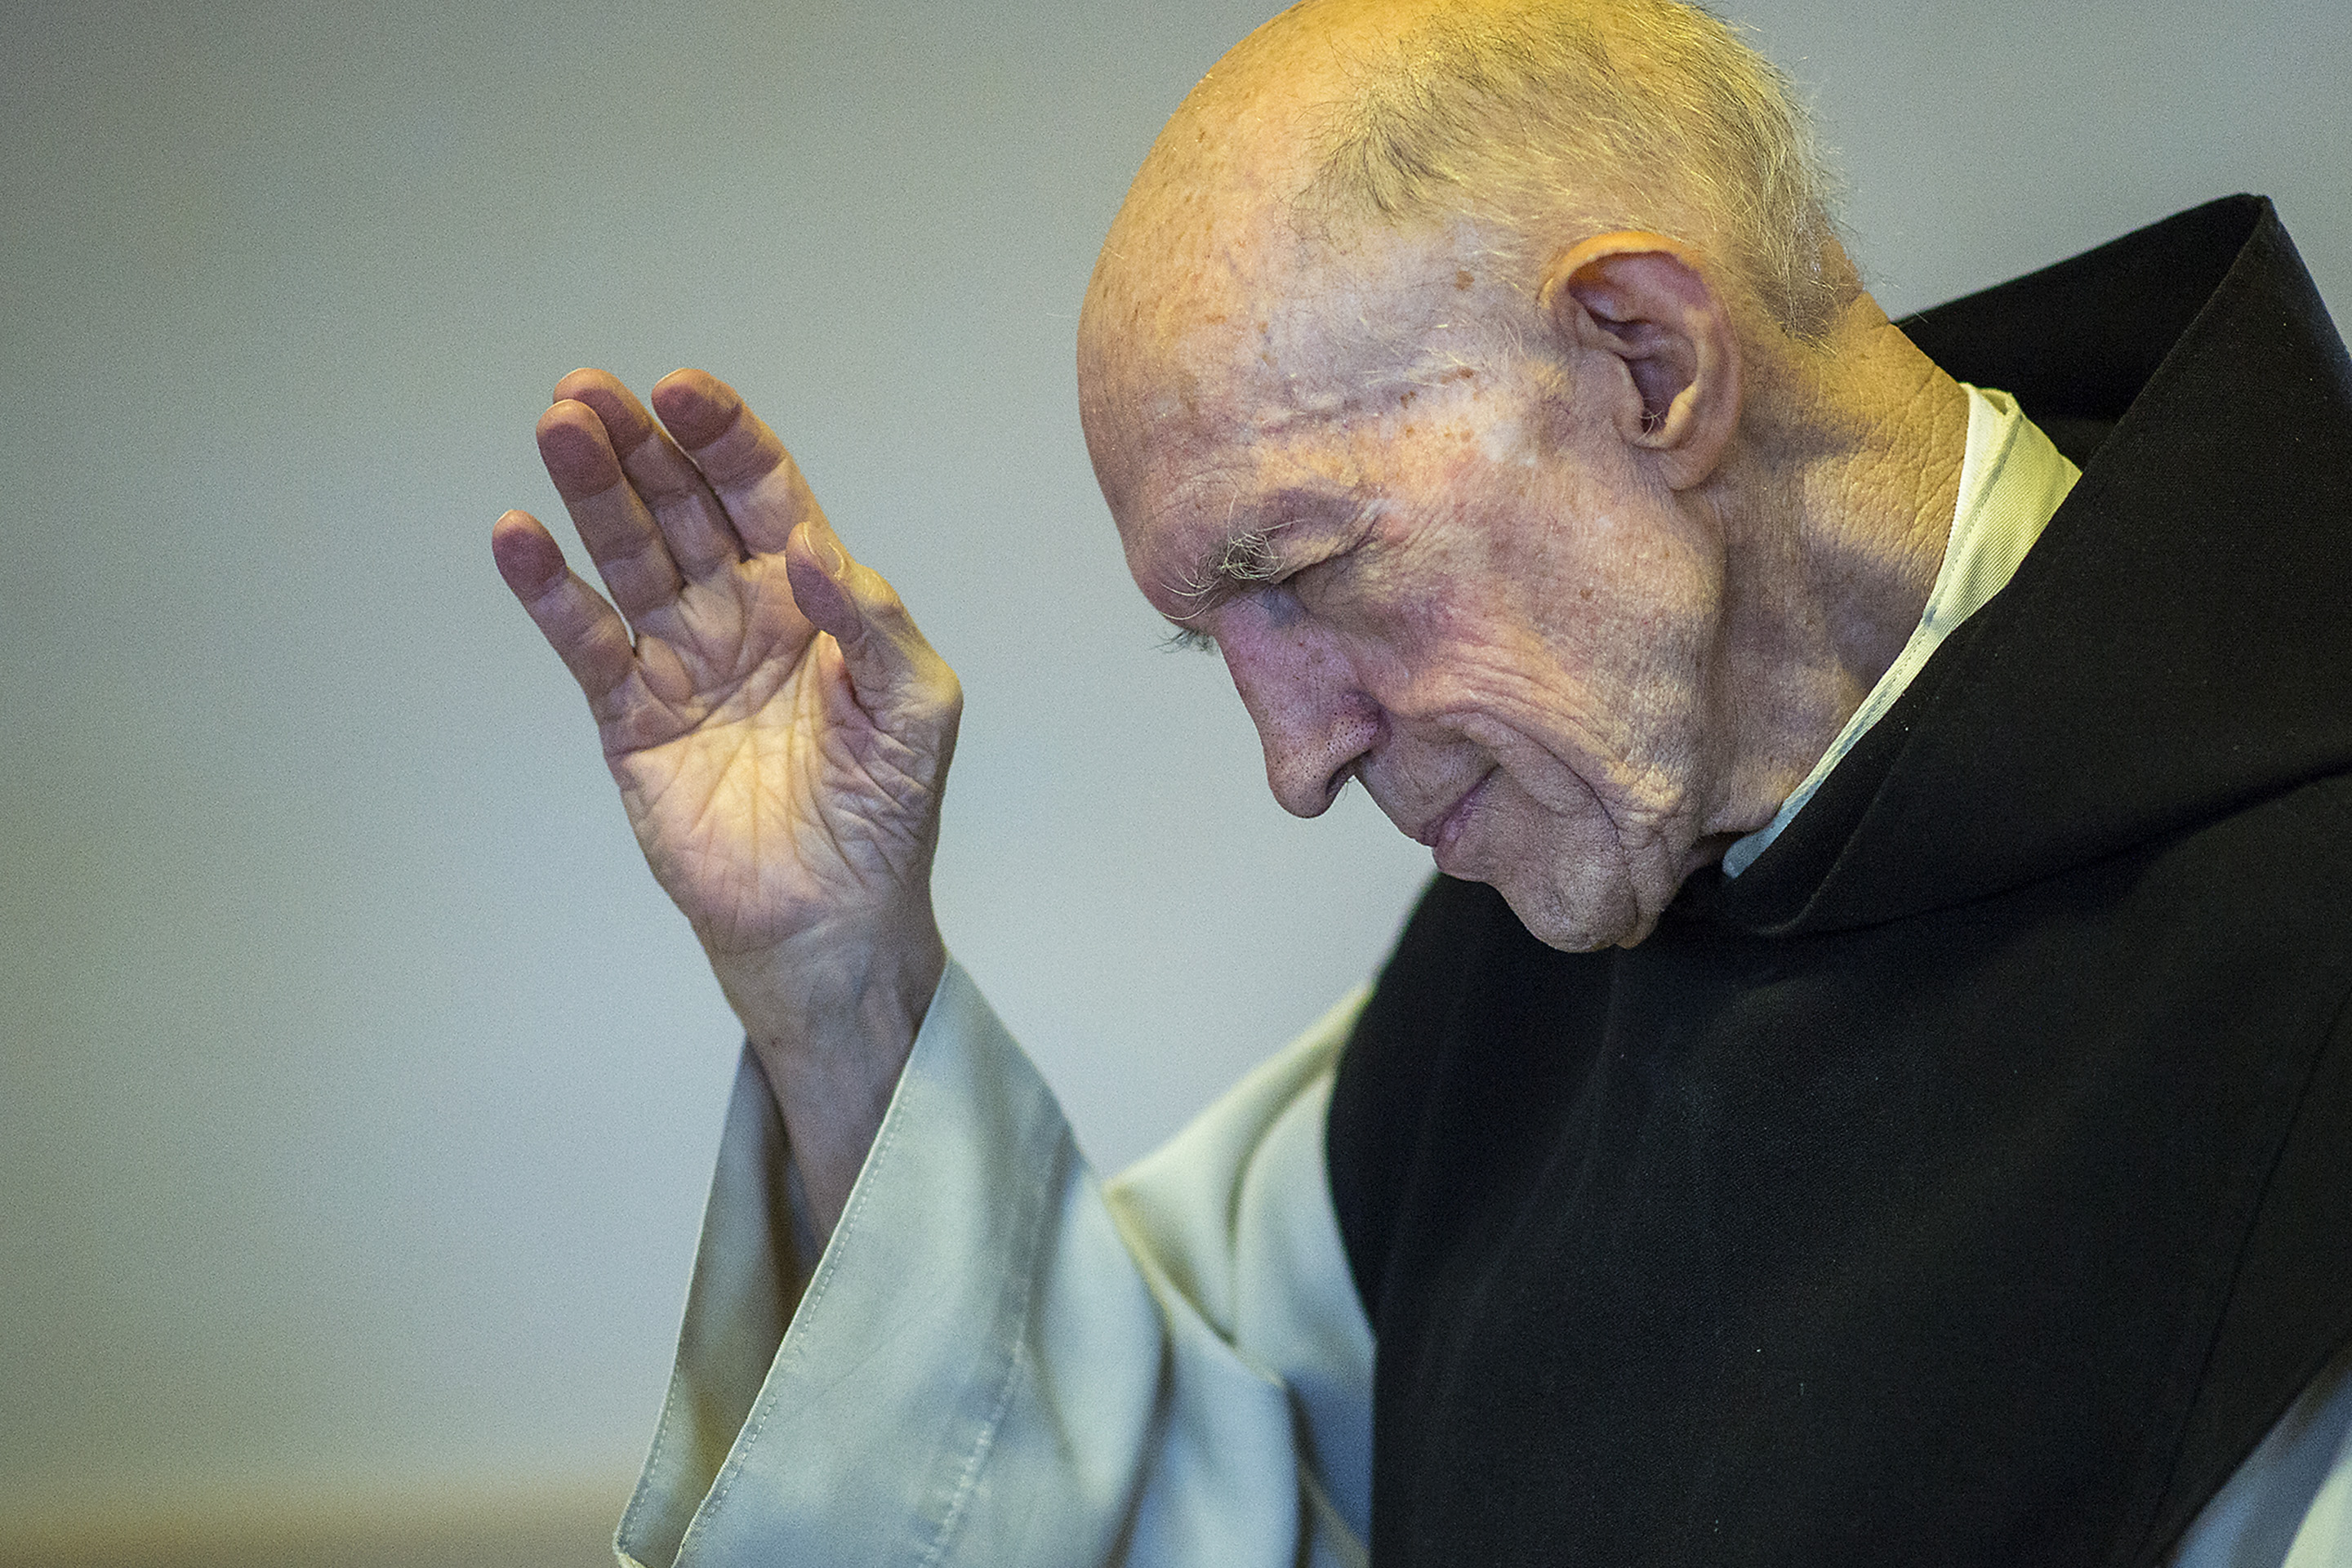 The monk and the monsignor: Unexpected companions on a Utah journey of life  and faith